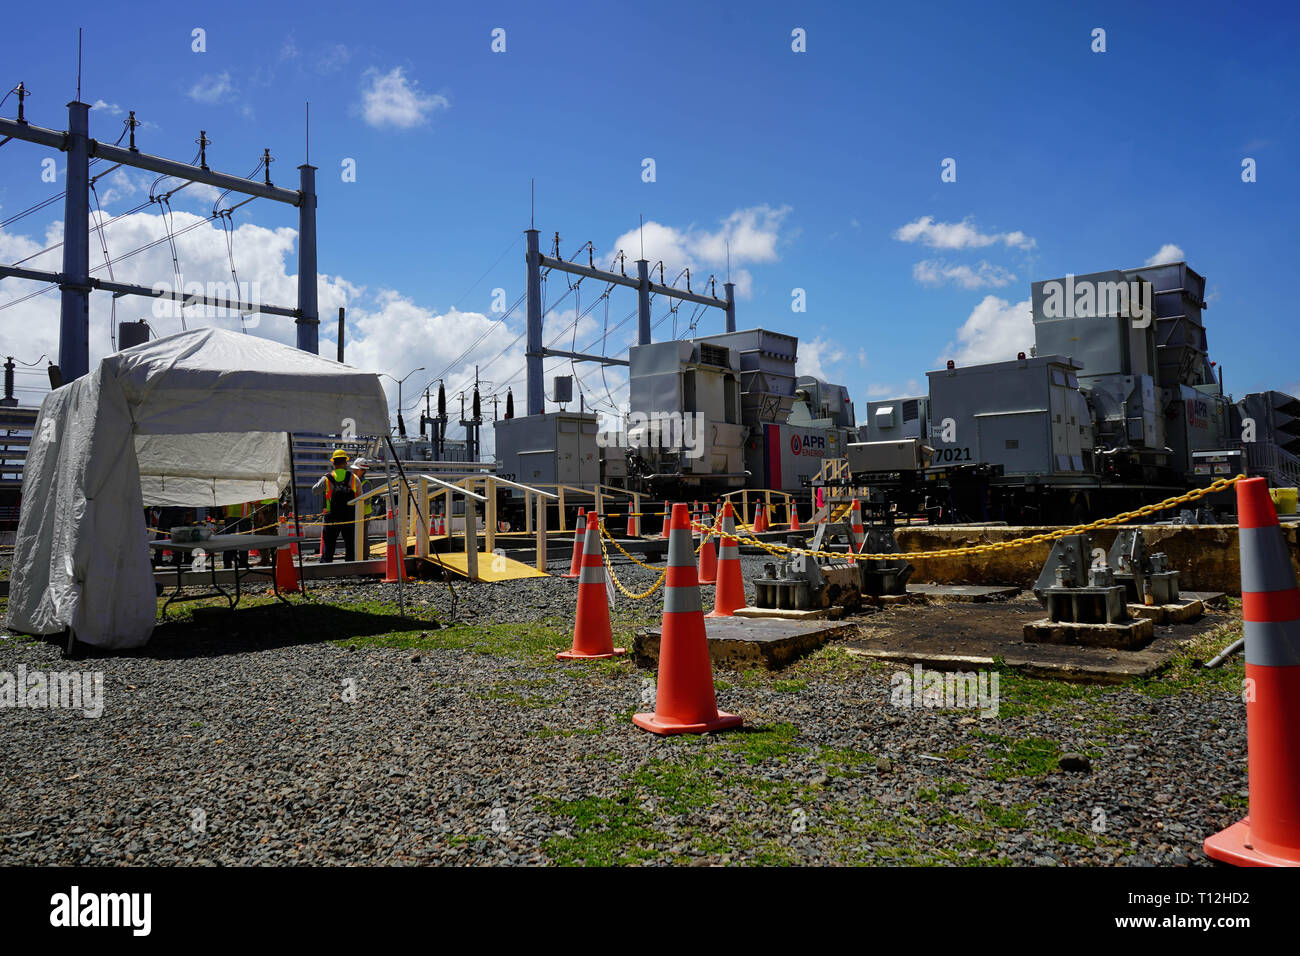 The Federal Emergency Management Agency (FEMA) and the U.S. Army Corps of Engineers had been maintaining backup power capability in Puerto Rico. As emergency restoration has progressed on the island. The original contract was for $35.1 million to provide additional generation to the power plant, there were 11 extensions to the contract for a final cost of $223 million. The generators have been managed by USACE’s Rapid Recovery Team which has been running the Palo Seco Project since Oct. 29, 2017. The demobilization of the mega-generators is a positive step in the ongoing recovery process in Pu Stock Photo